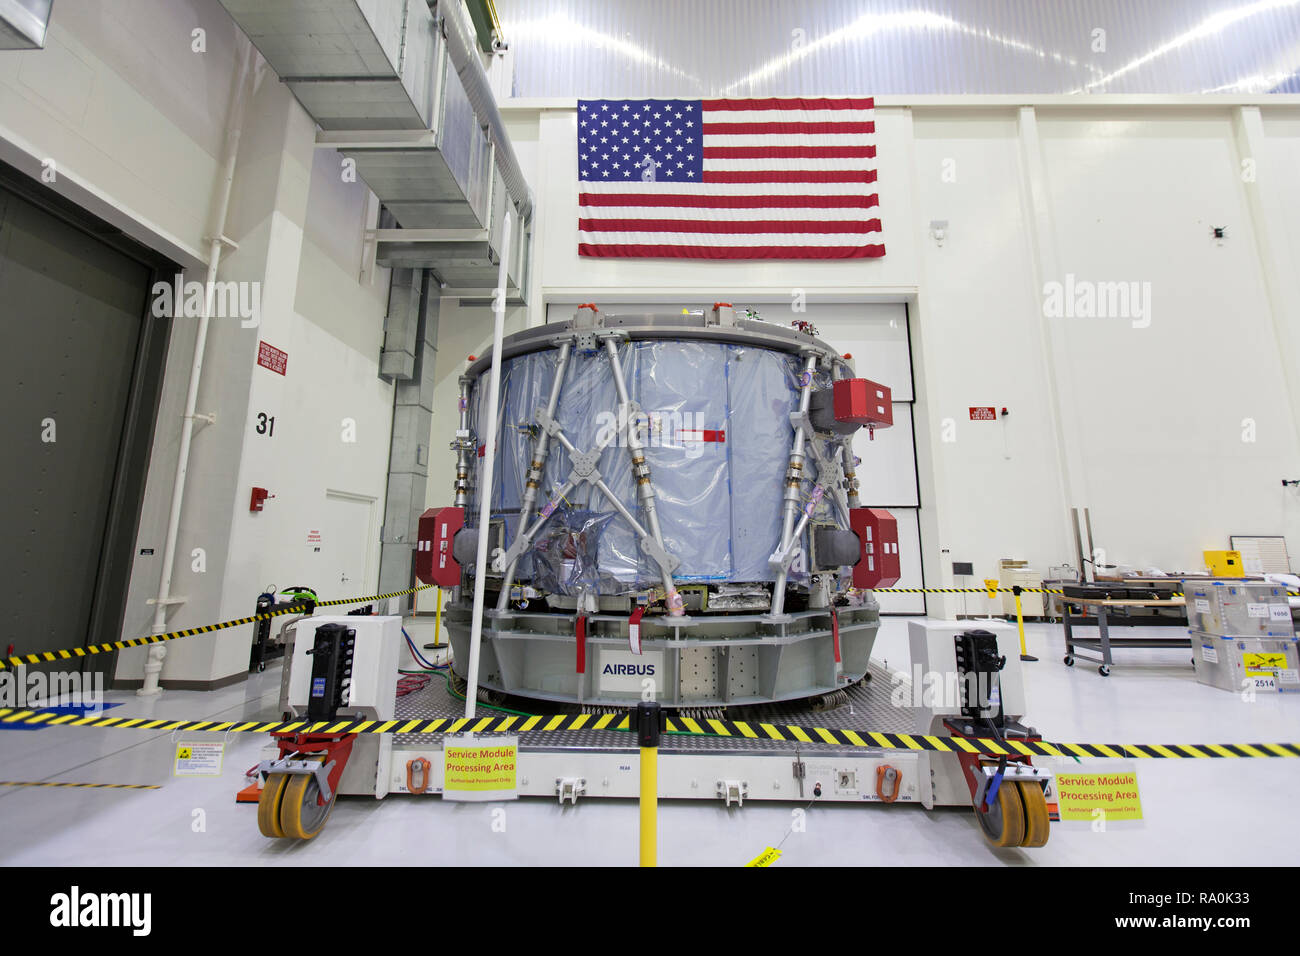 The European Service Module is unpacked inside the Neil Armstrong Operations and Checkout Building high bay at the Kennedy Space Center November 7, 2018 in Cape Canaveral, Florida. The ESM is provided by the European Space Agency, and built by Airbus Defence and Space. It will supply the main propulsion system and power to the Orion spacecraft for Exploration Mission-1, a mission around the Moon. The ESM also will house air and water for astronauts on future missions. EM-1 will be an uncrewed flight test that will provide a foundation for human deep space exploration to destinations beyond Ear Stock Photo